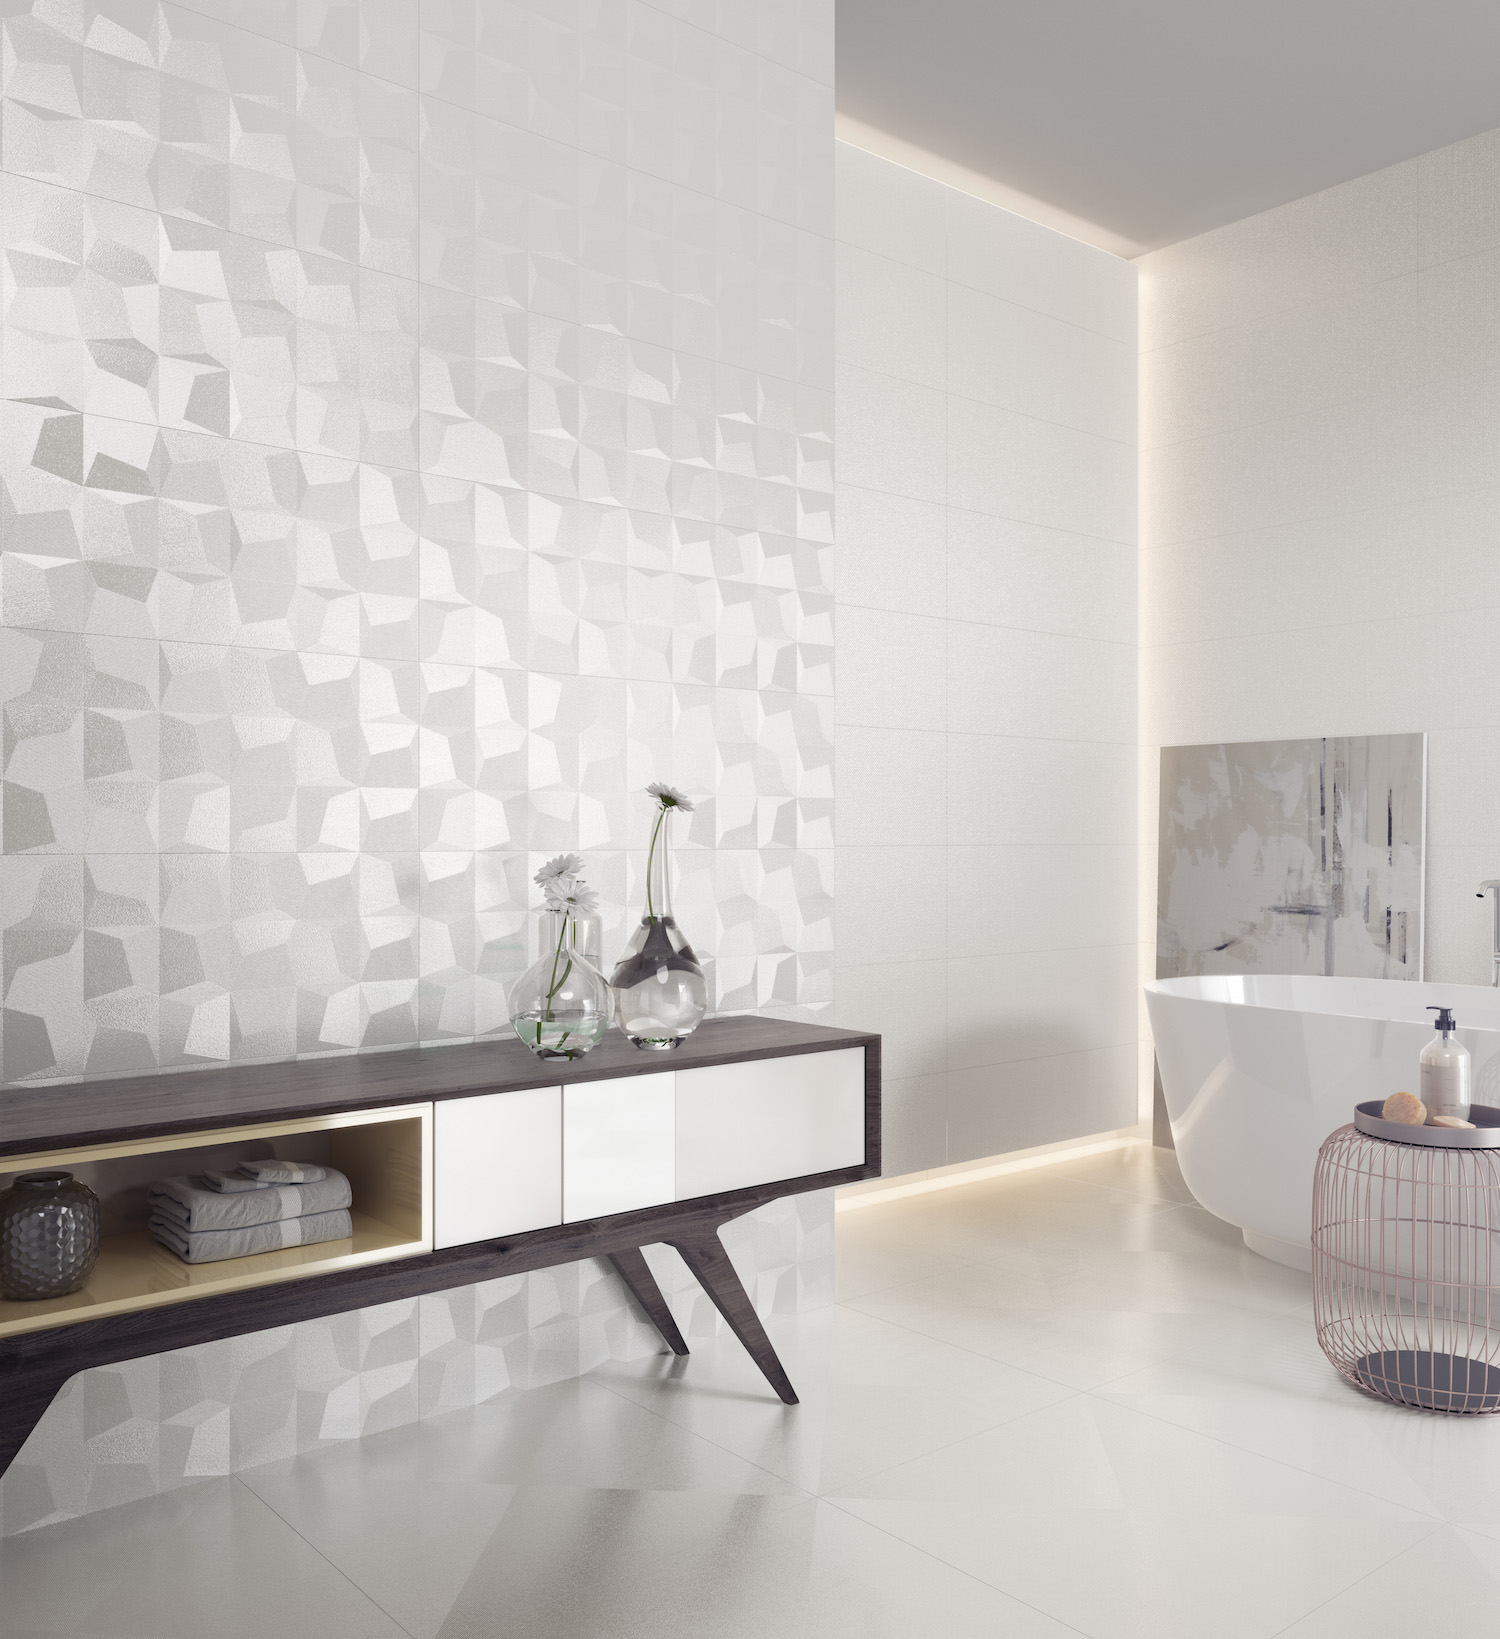 Emser Tile Unveils More Than 20 New Collections at SURFACES 2018, Booth